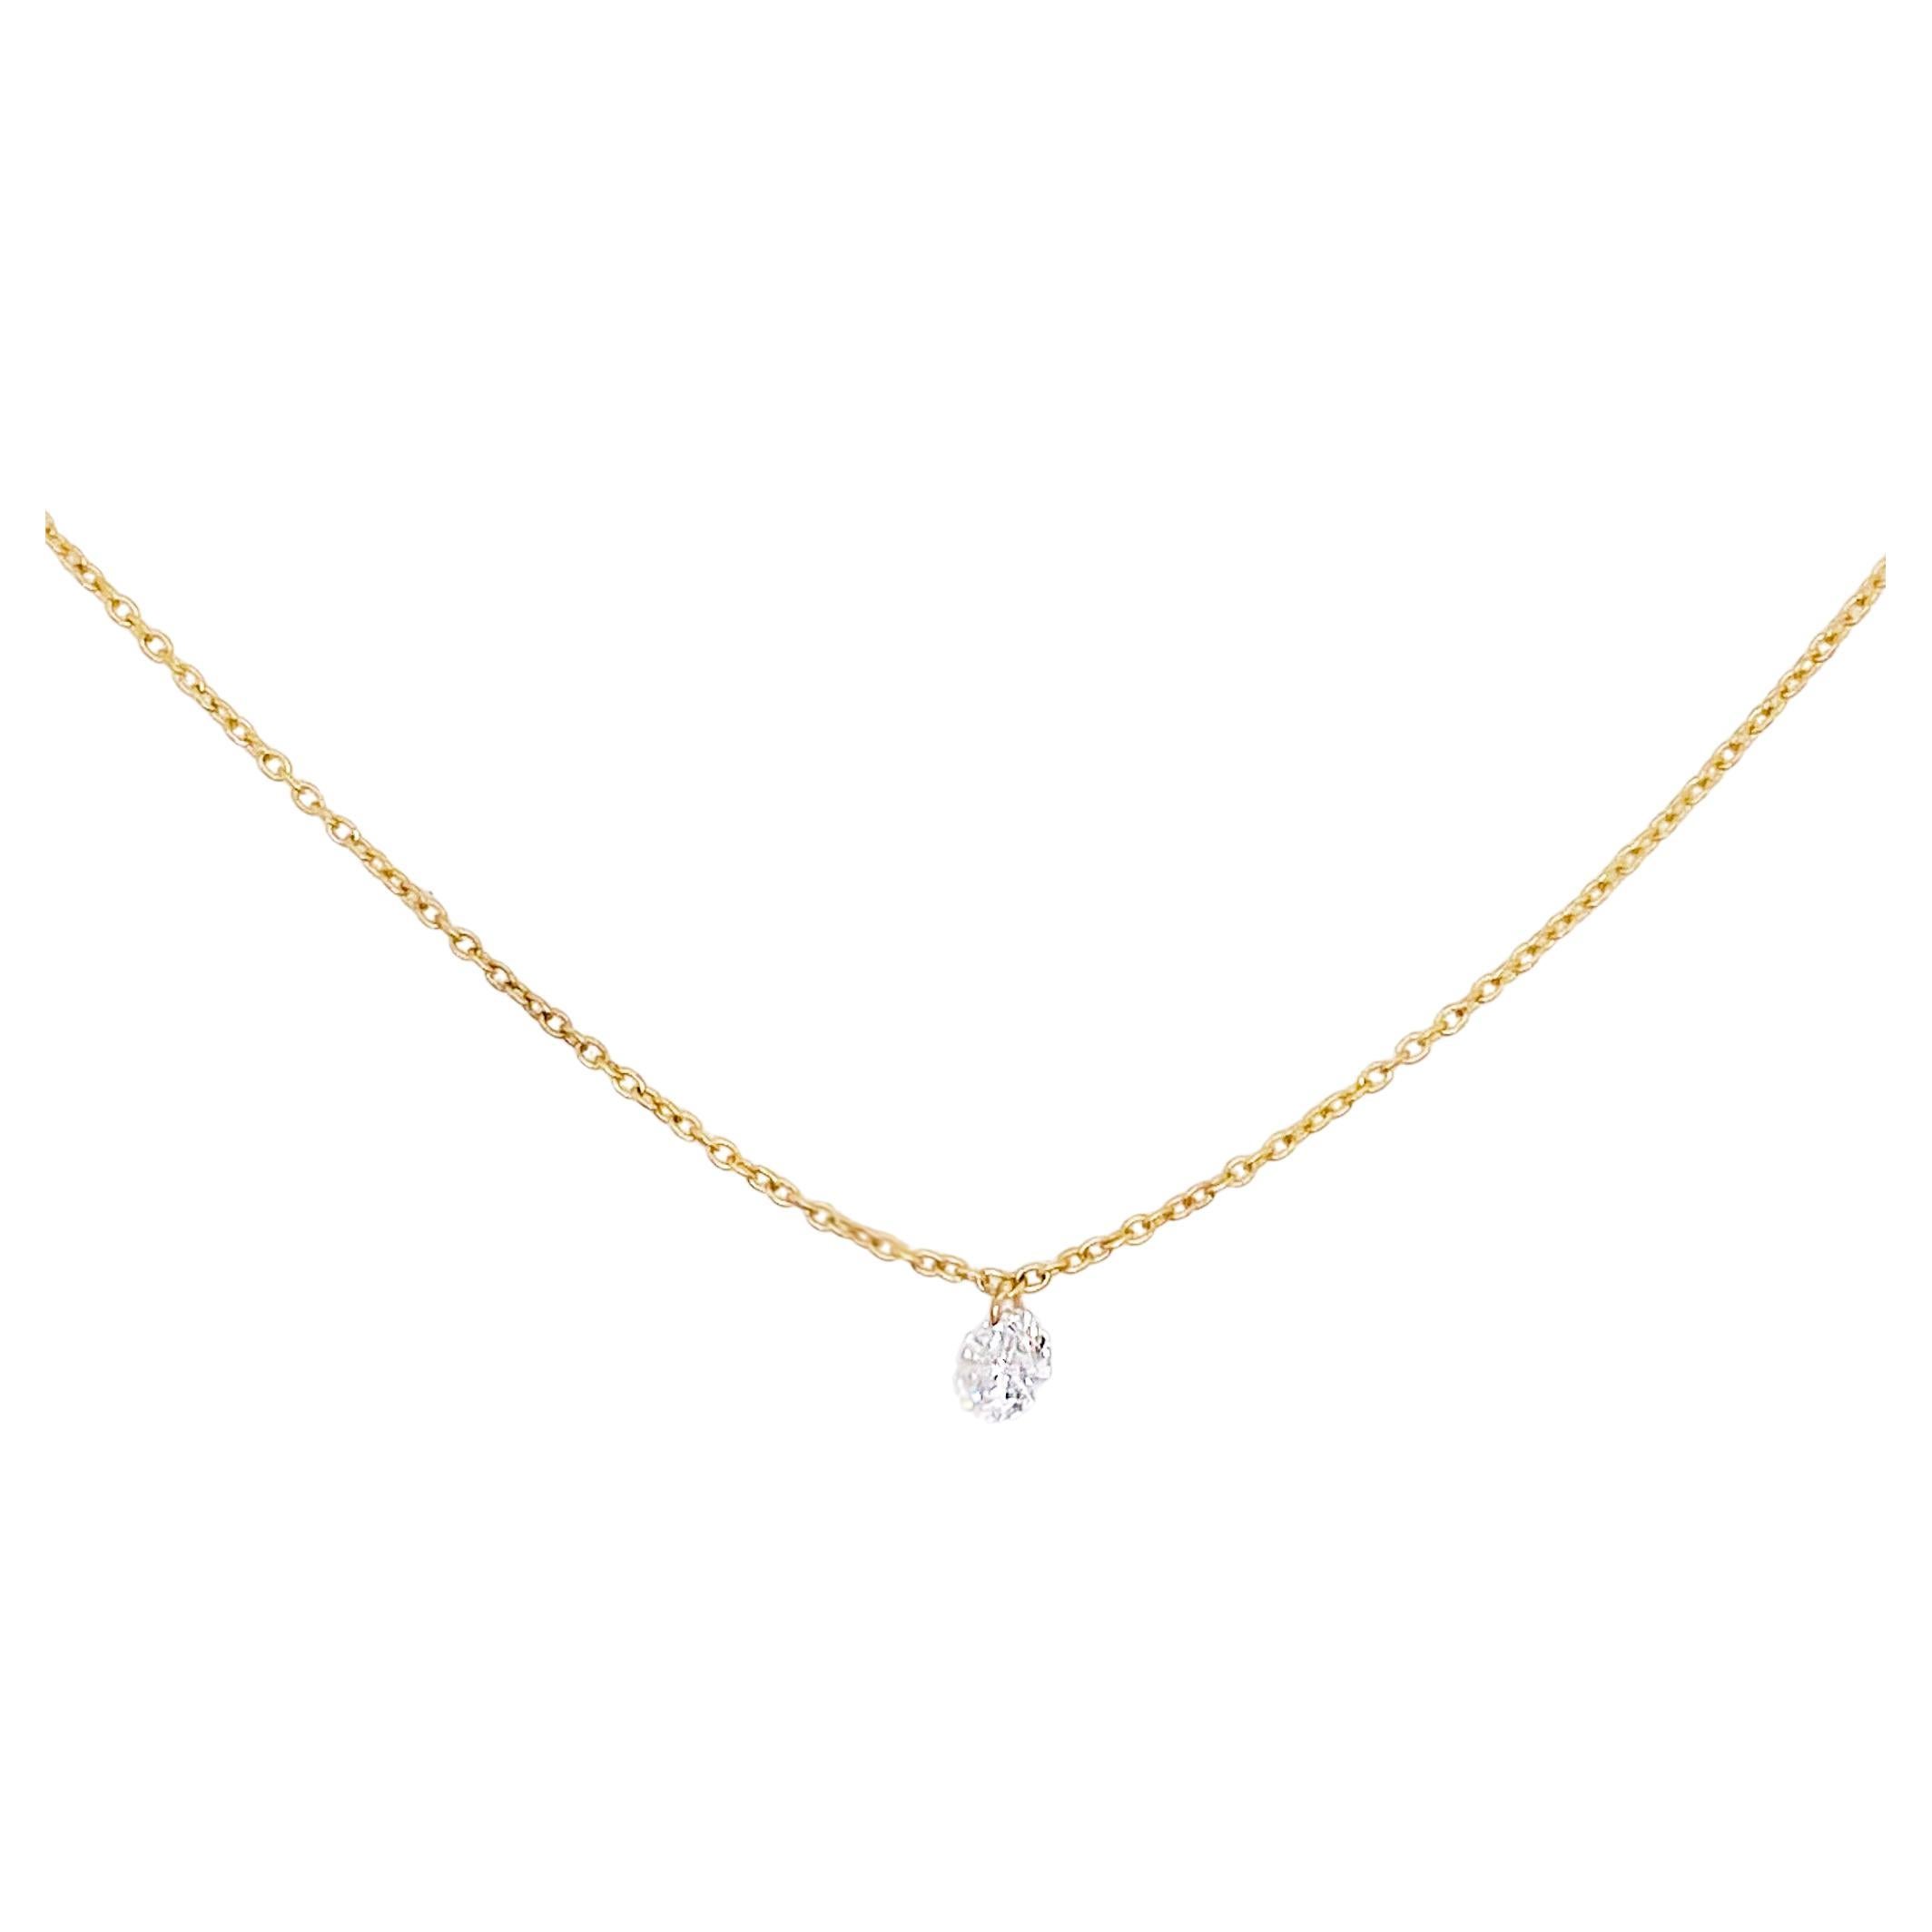 Dancing Diamond Necklace, .25ct Diamond Necklace, Dainty Solitaire Necklace For Sale